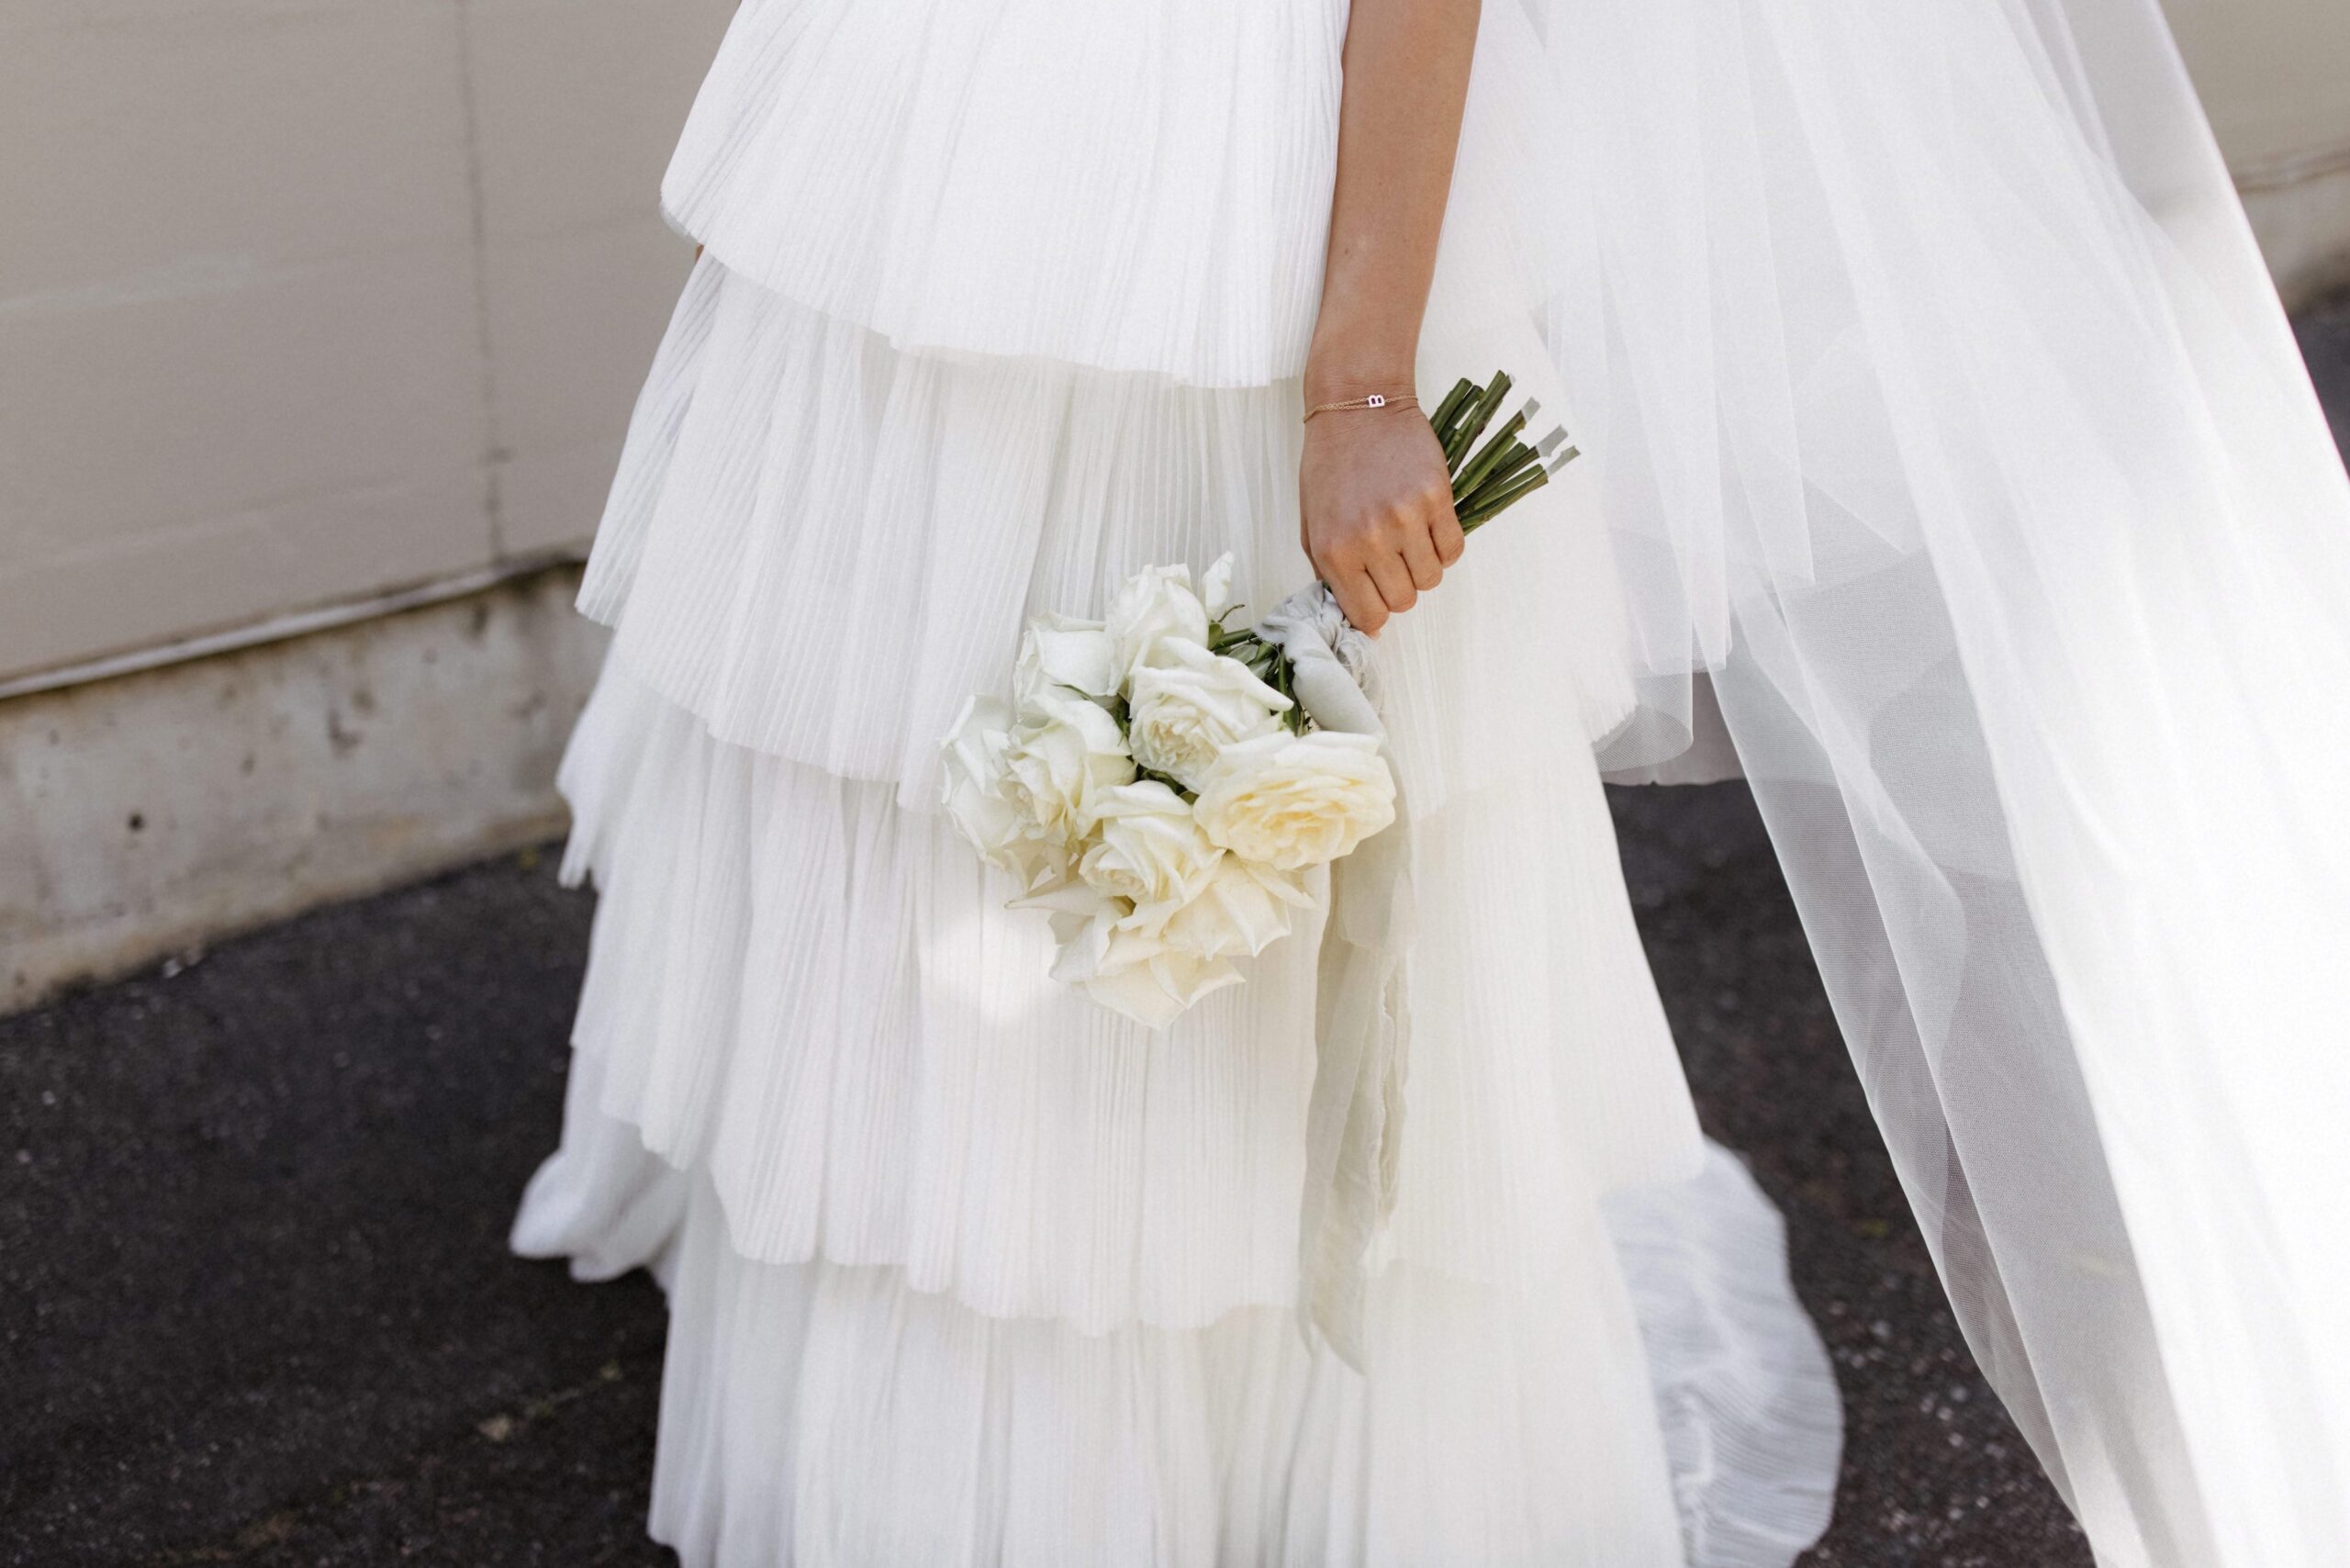 A close up image of Bethany's full tiered skirt and white bouquet.